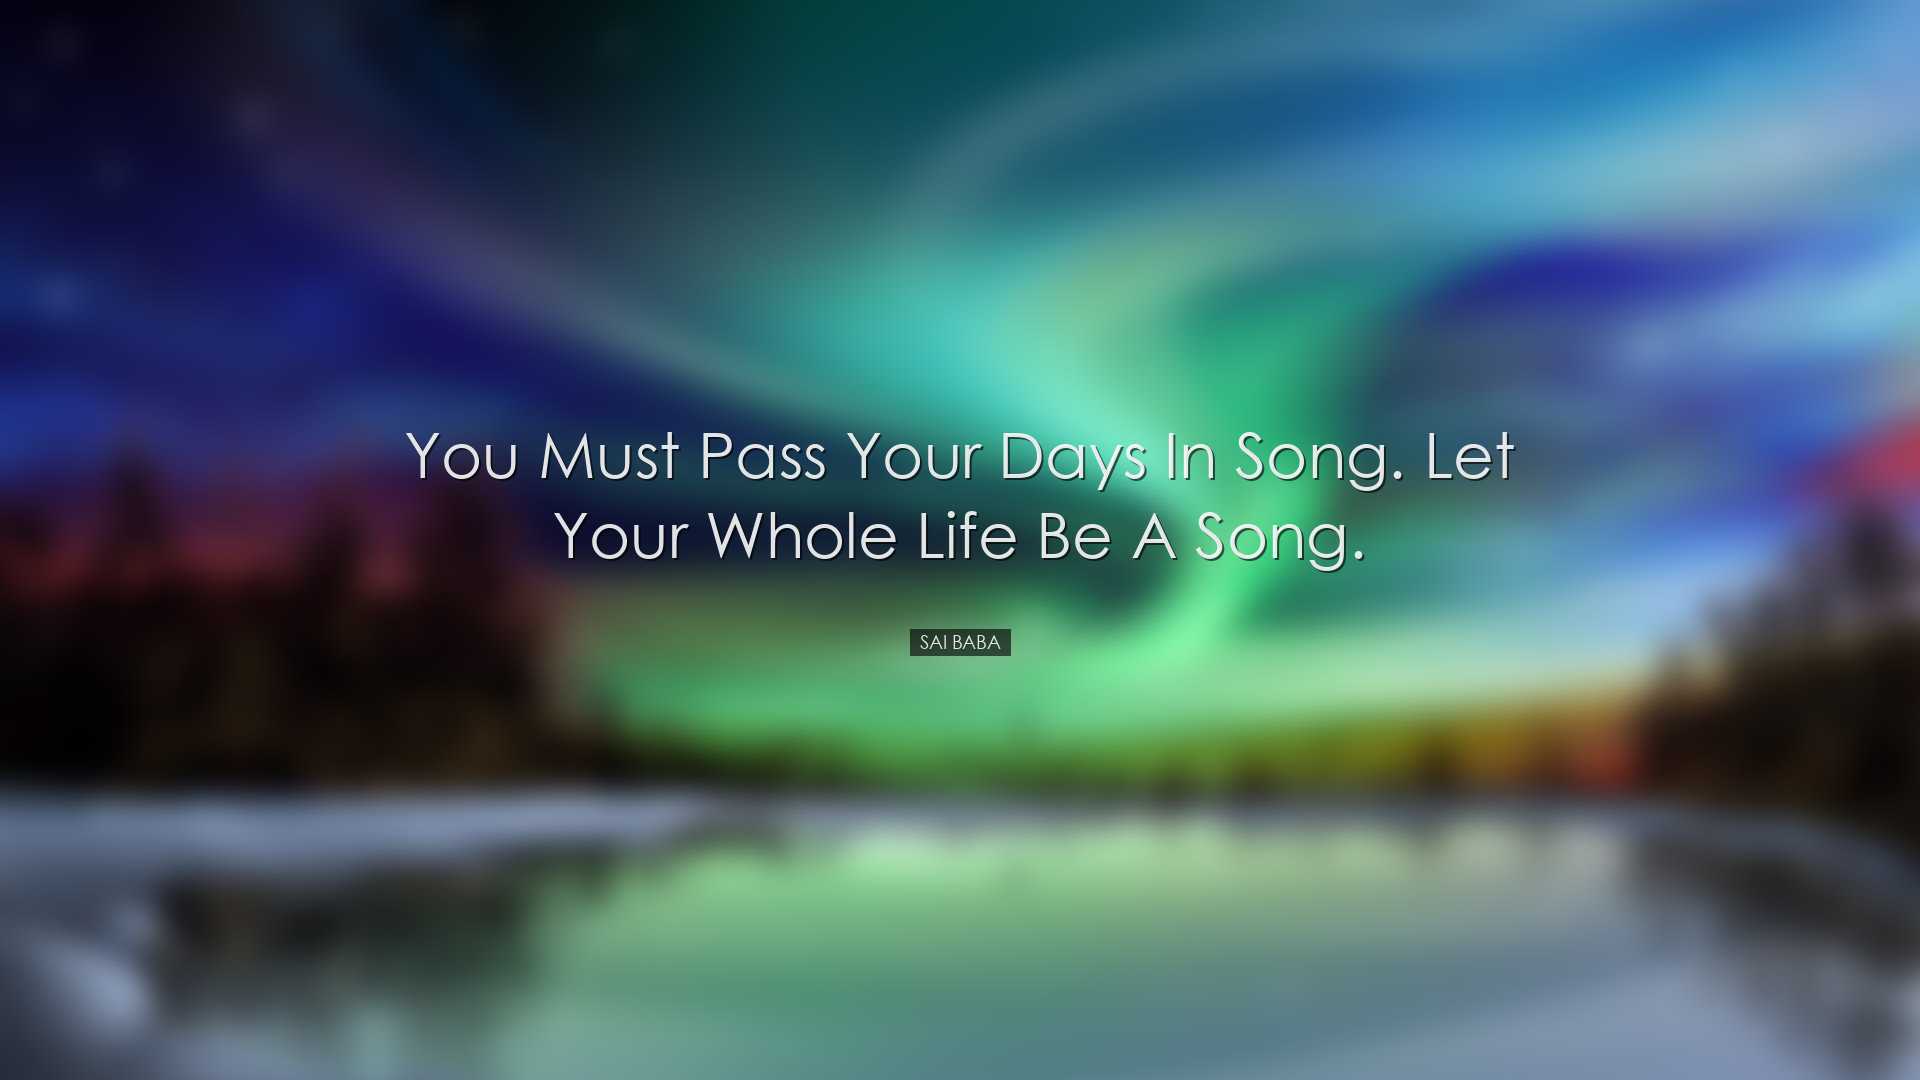 You must pass your days in song. Let your whole life be a song. -